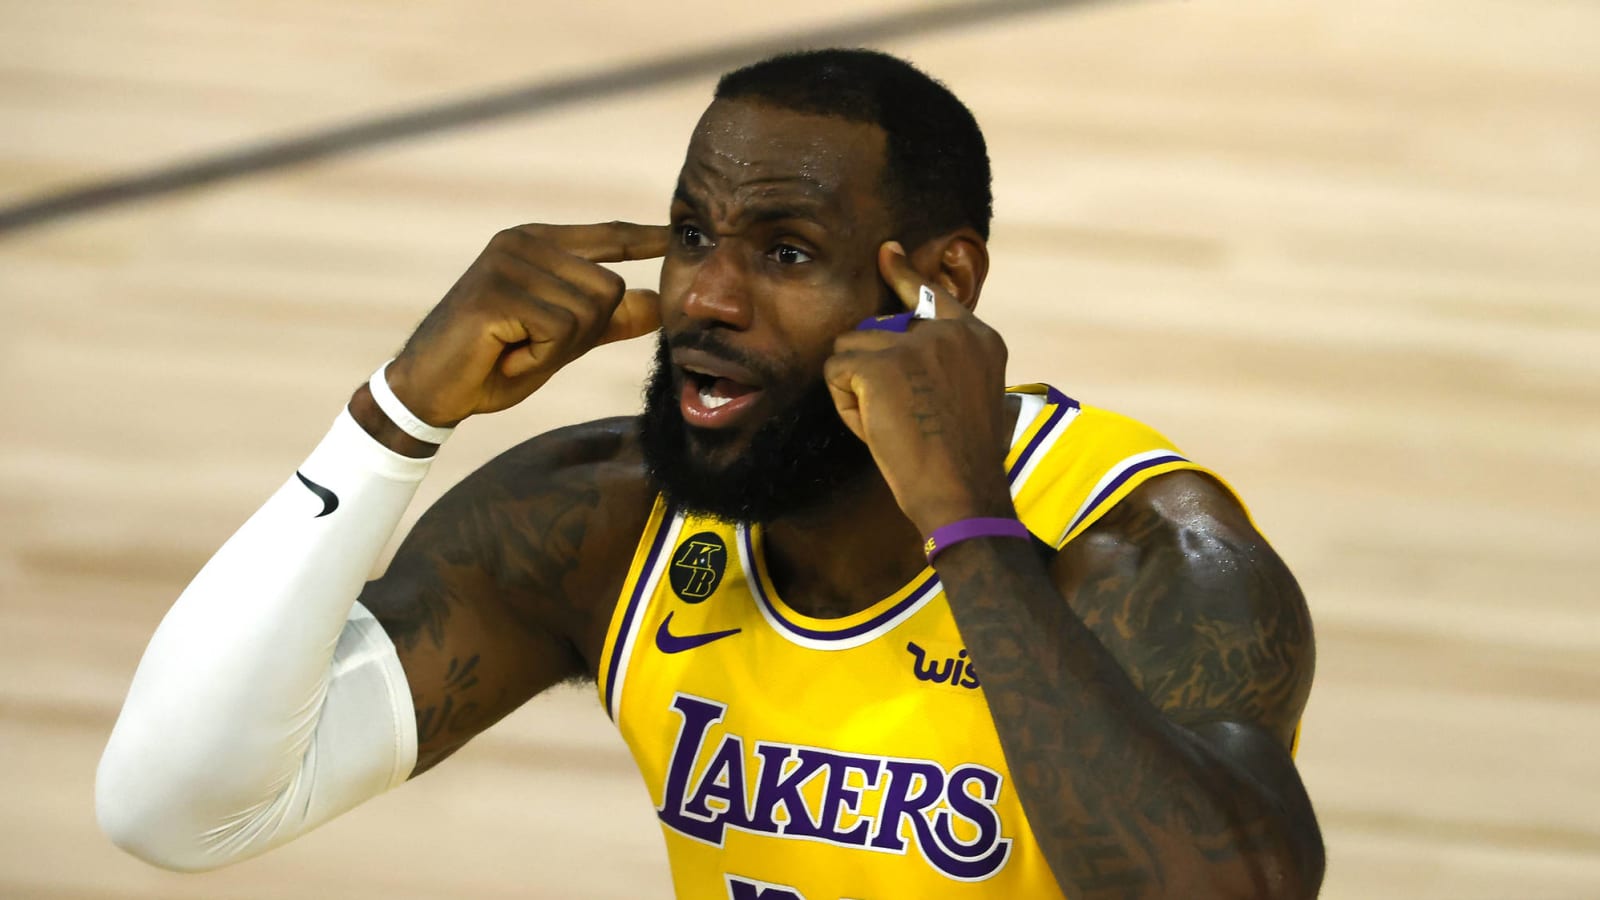 LeBron James hints at some issues off the court